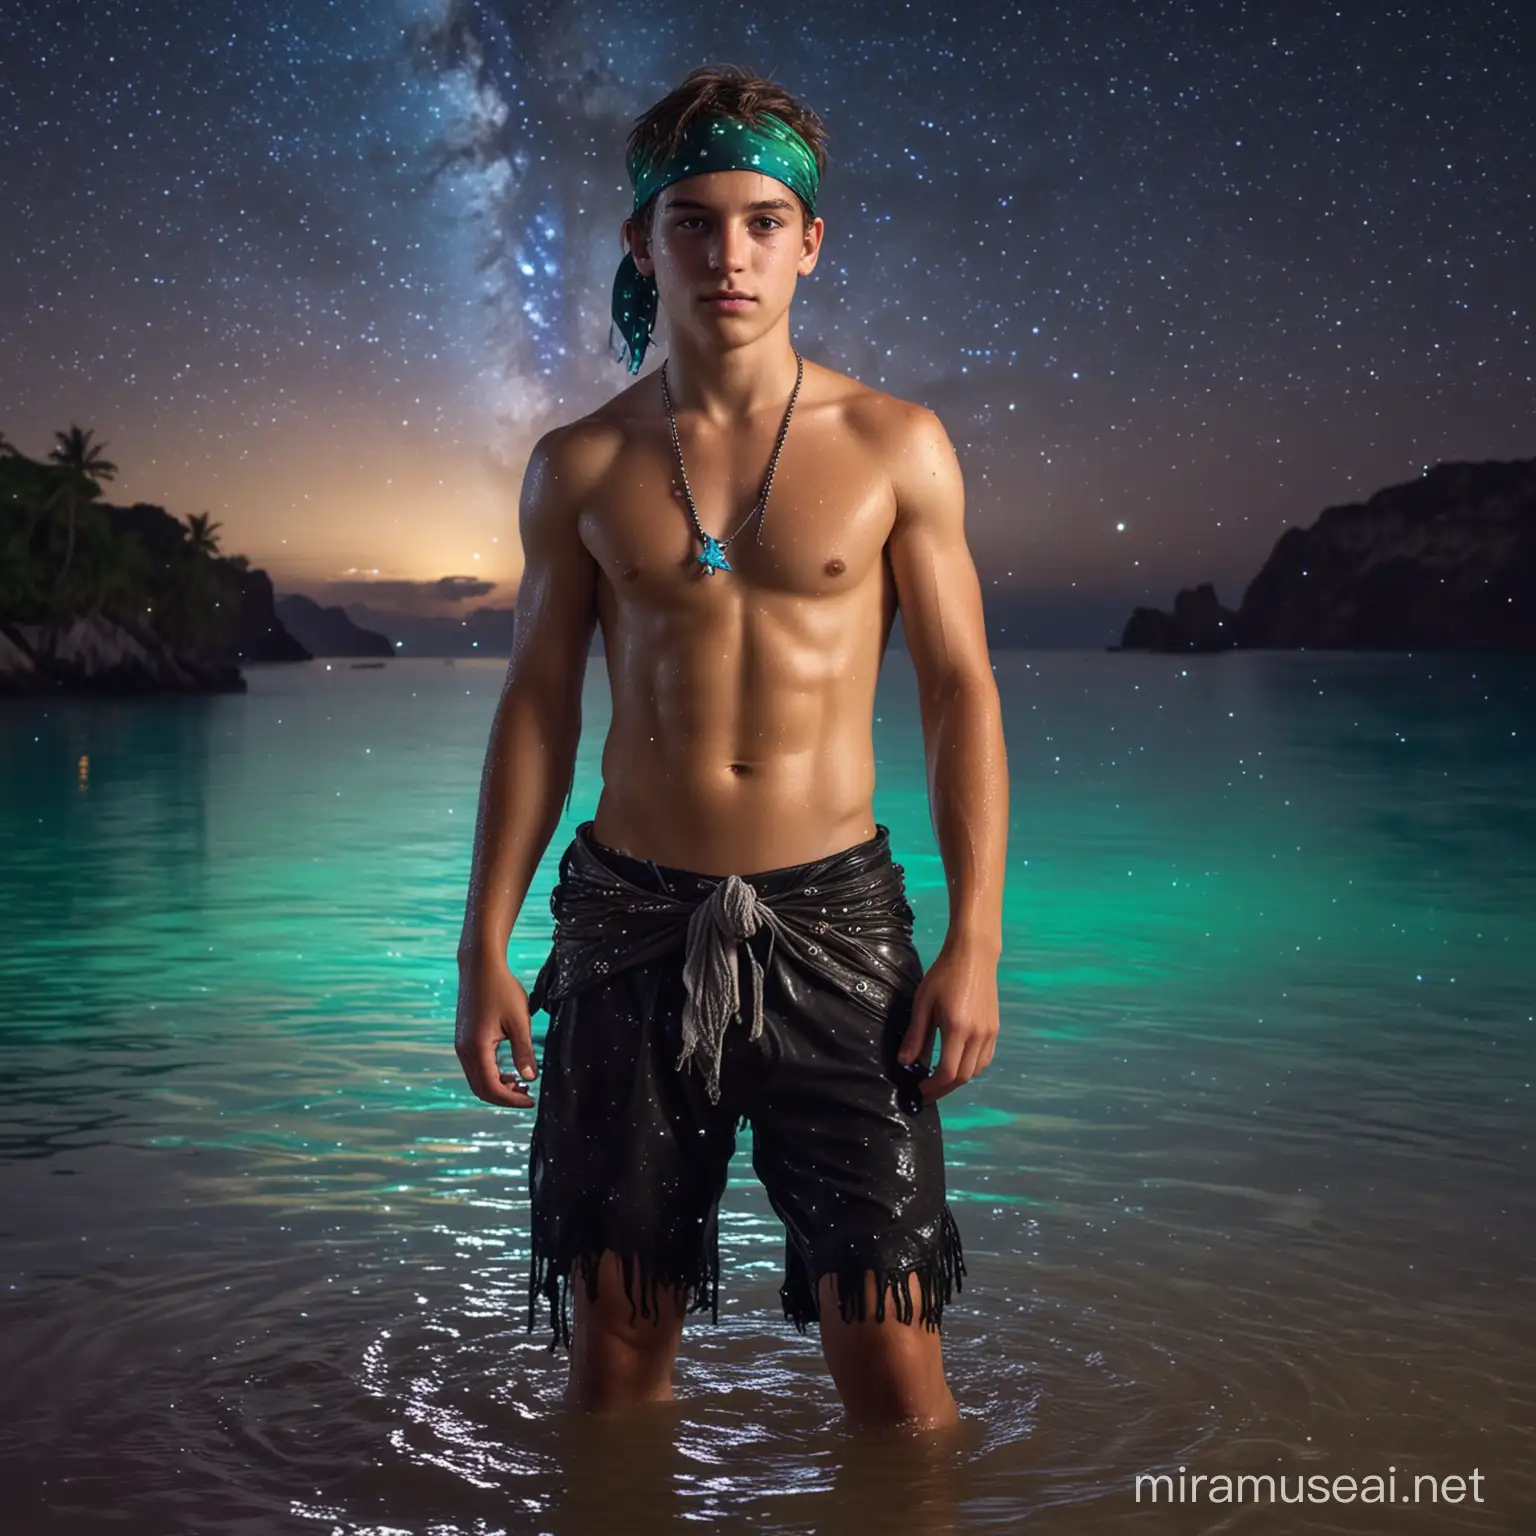 Adventurous Teen Pirate Boy Poses Shirtless at Oasis on Heavenly Island at Night